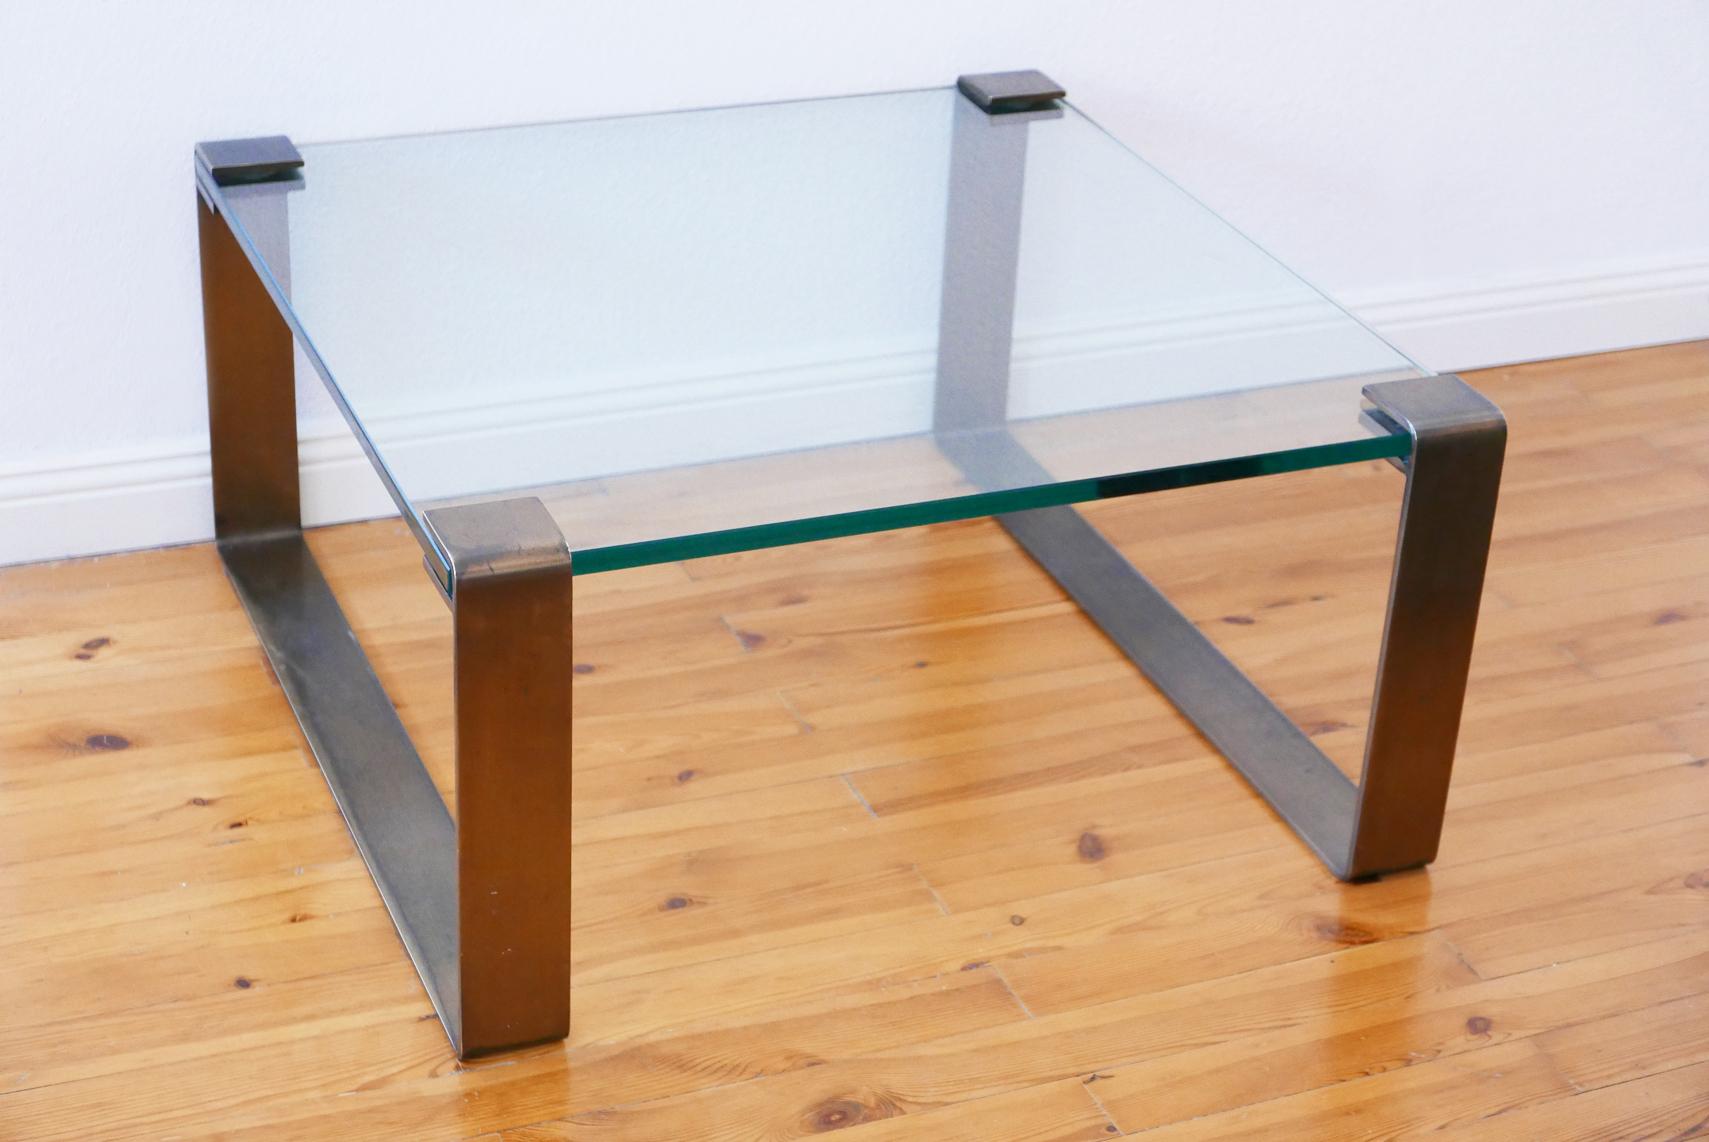 Anodized Elegant Midcentury Coffee Table by Peter Draenert for Draenert, 1960s, Germany For Sale